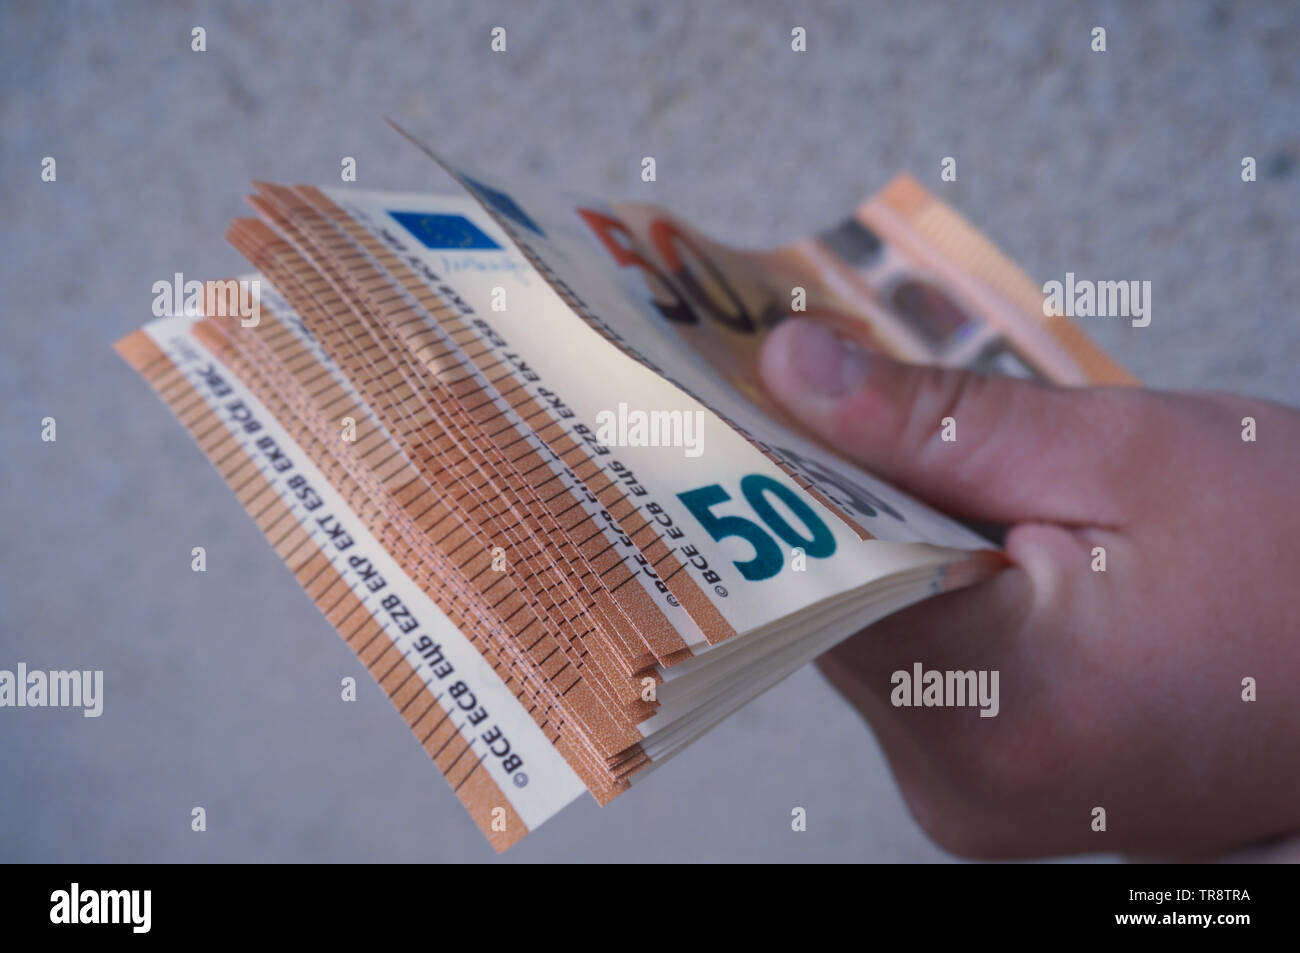 White Hand holding stack of fifty euros backnotes money close up Stock Photo